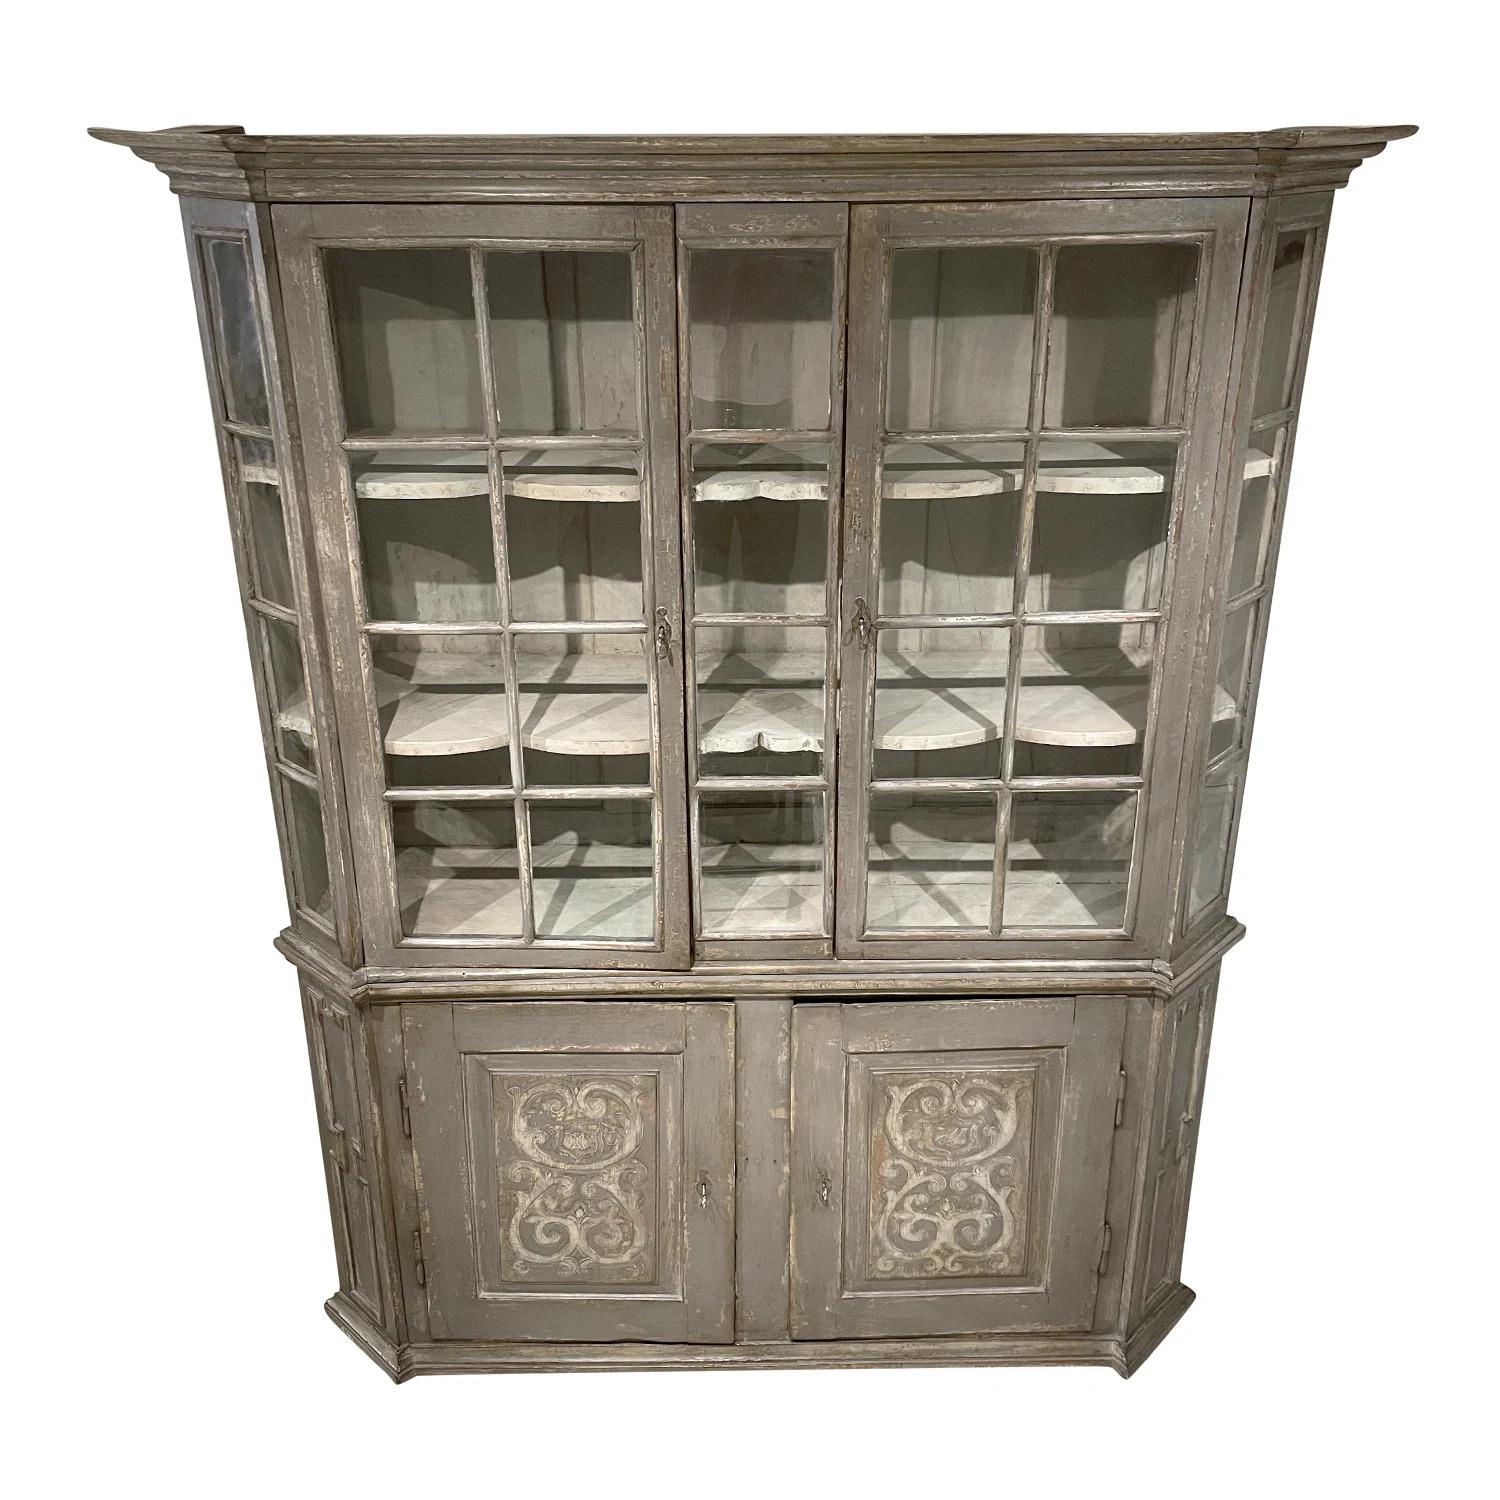 A light-grey, antique large Swedish Baroque two-part bookcase made of hand crafted painted Pinewood, in good condition. The upper part of the detailed Scandinavian library, showcase is composed with two doors featuring its original glass and two